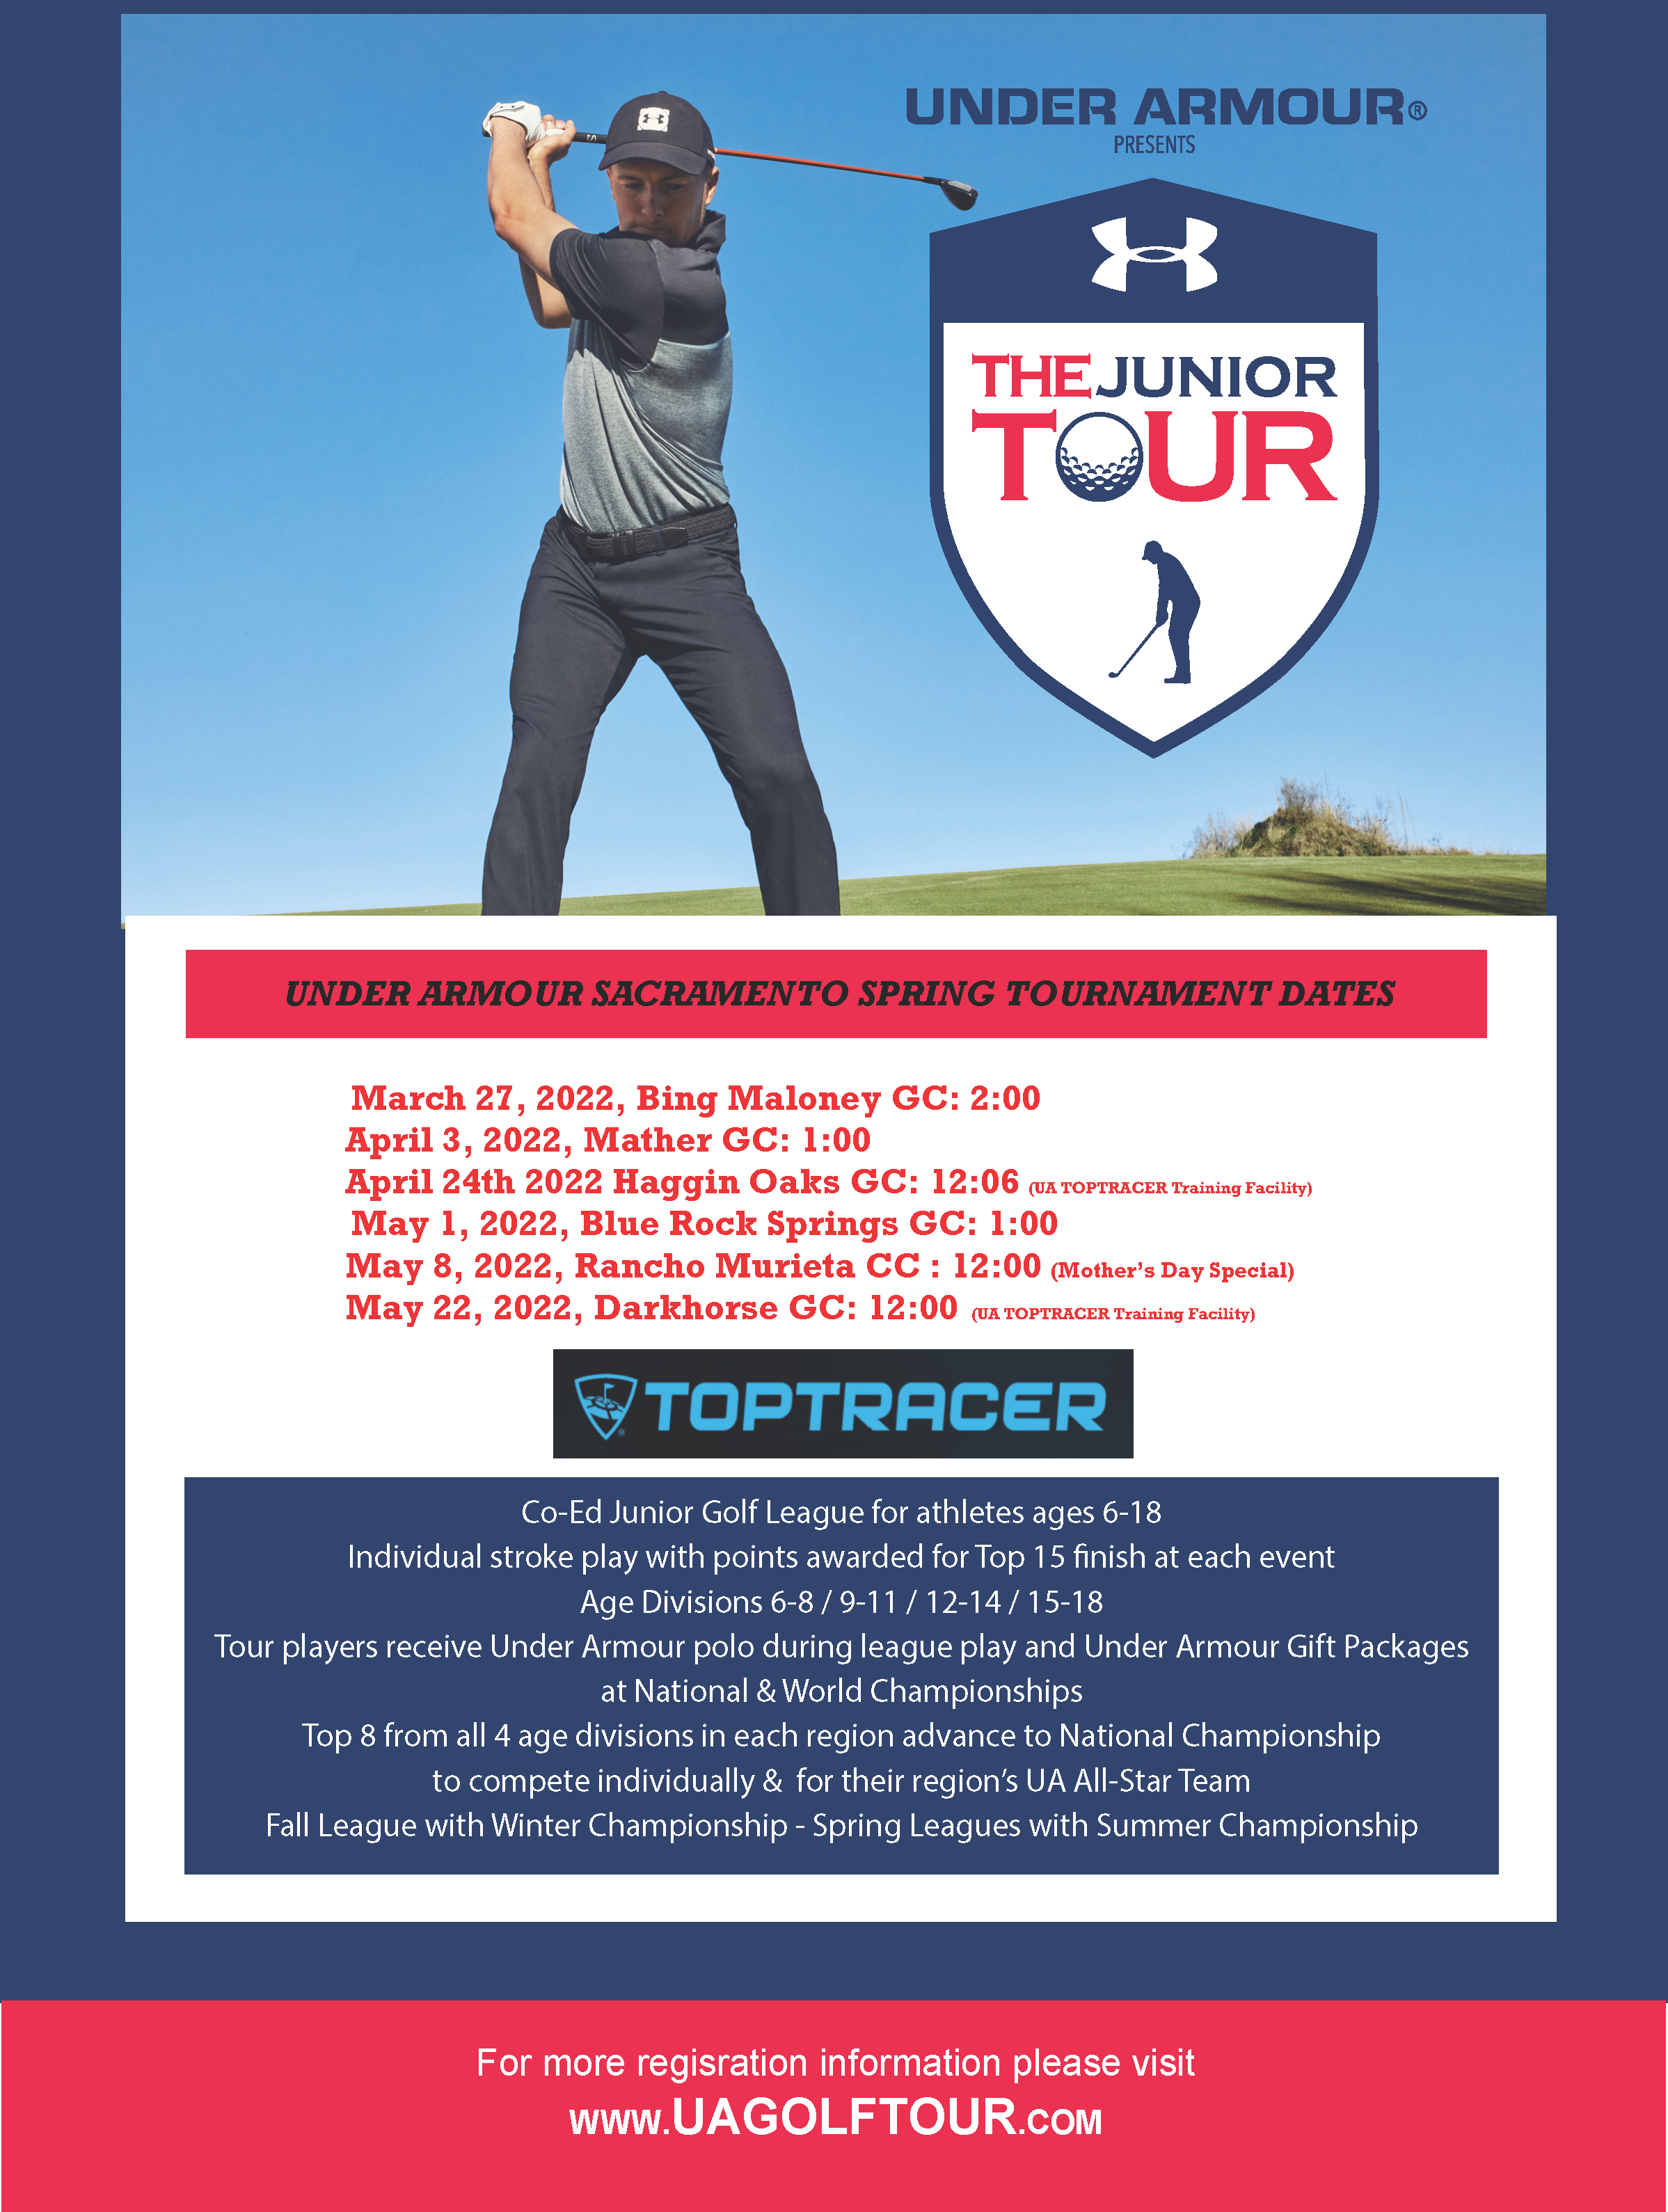 Under Armour Junior to Be Held At Haggin Oaks April 24 and Maloney March 27 - Haggin Oaks